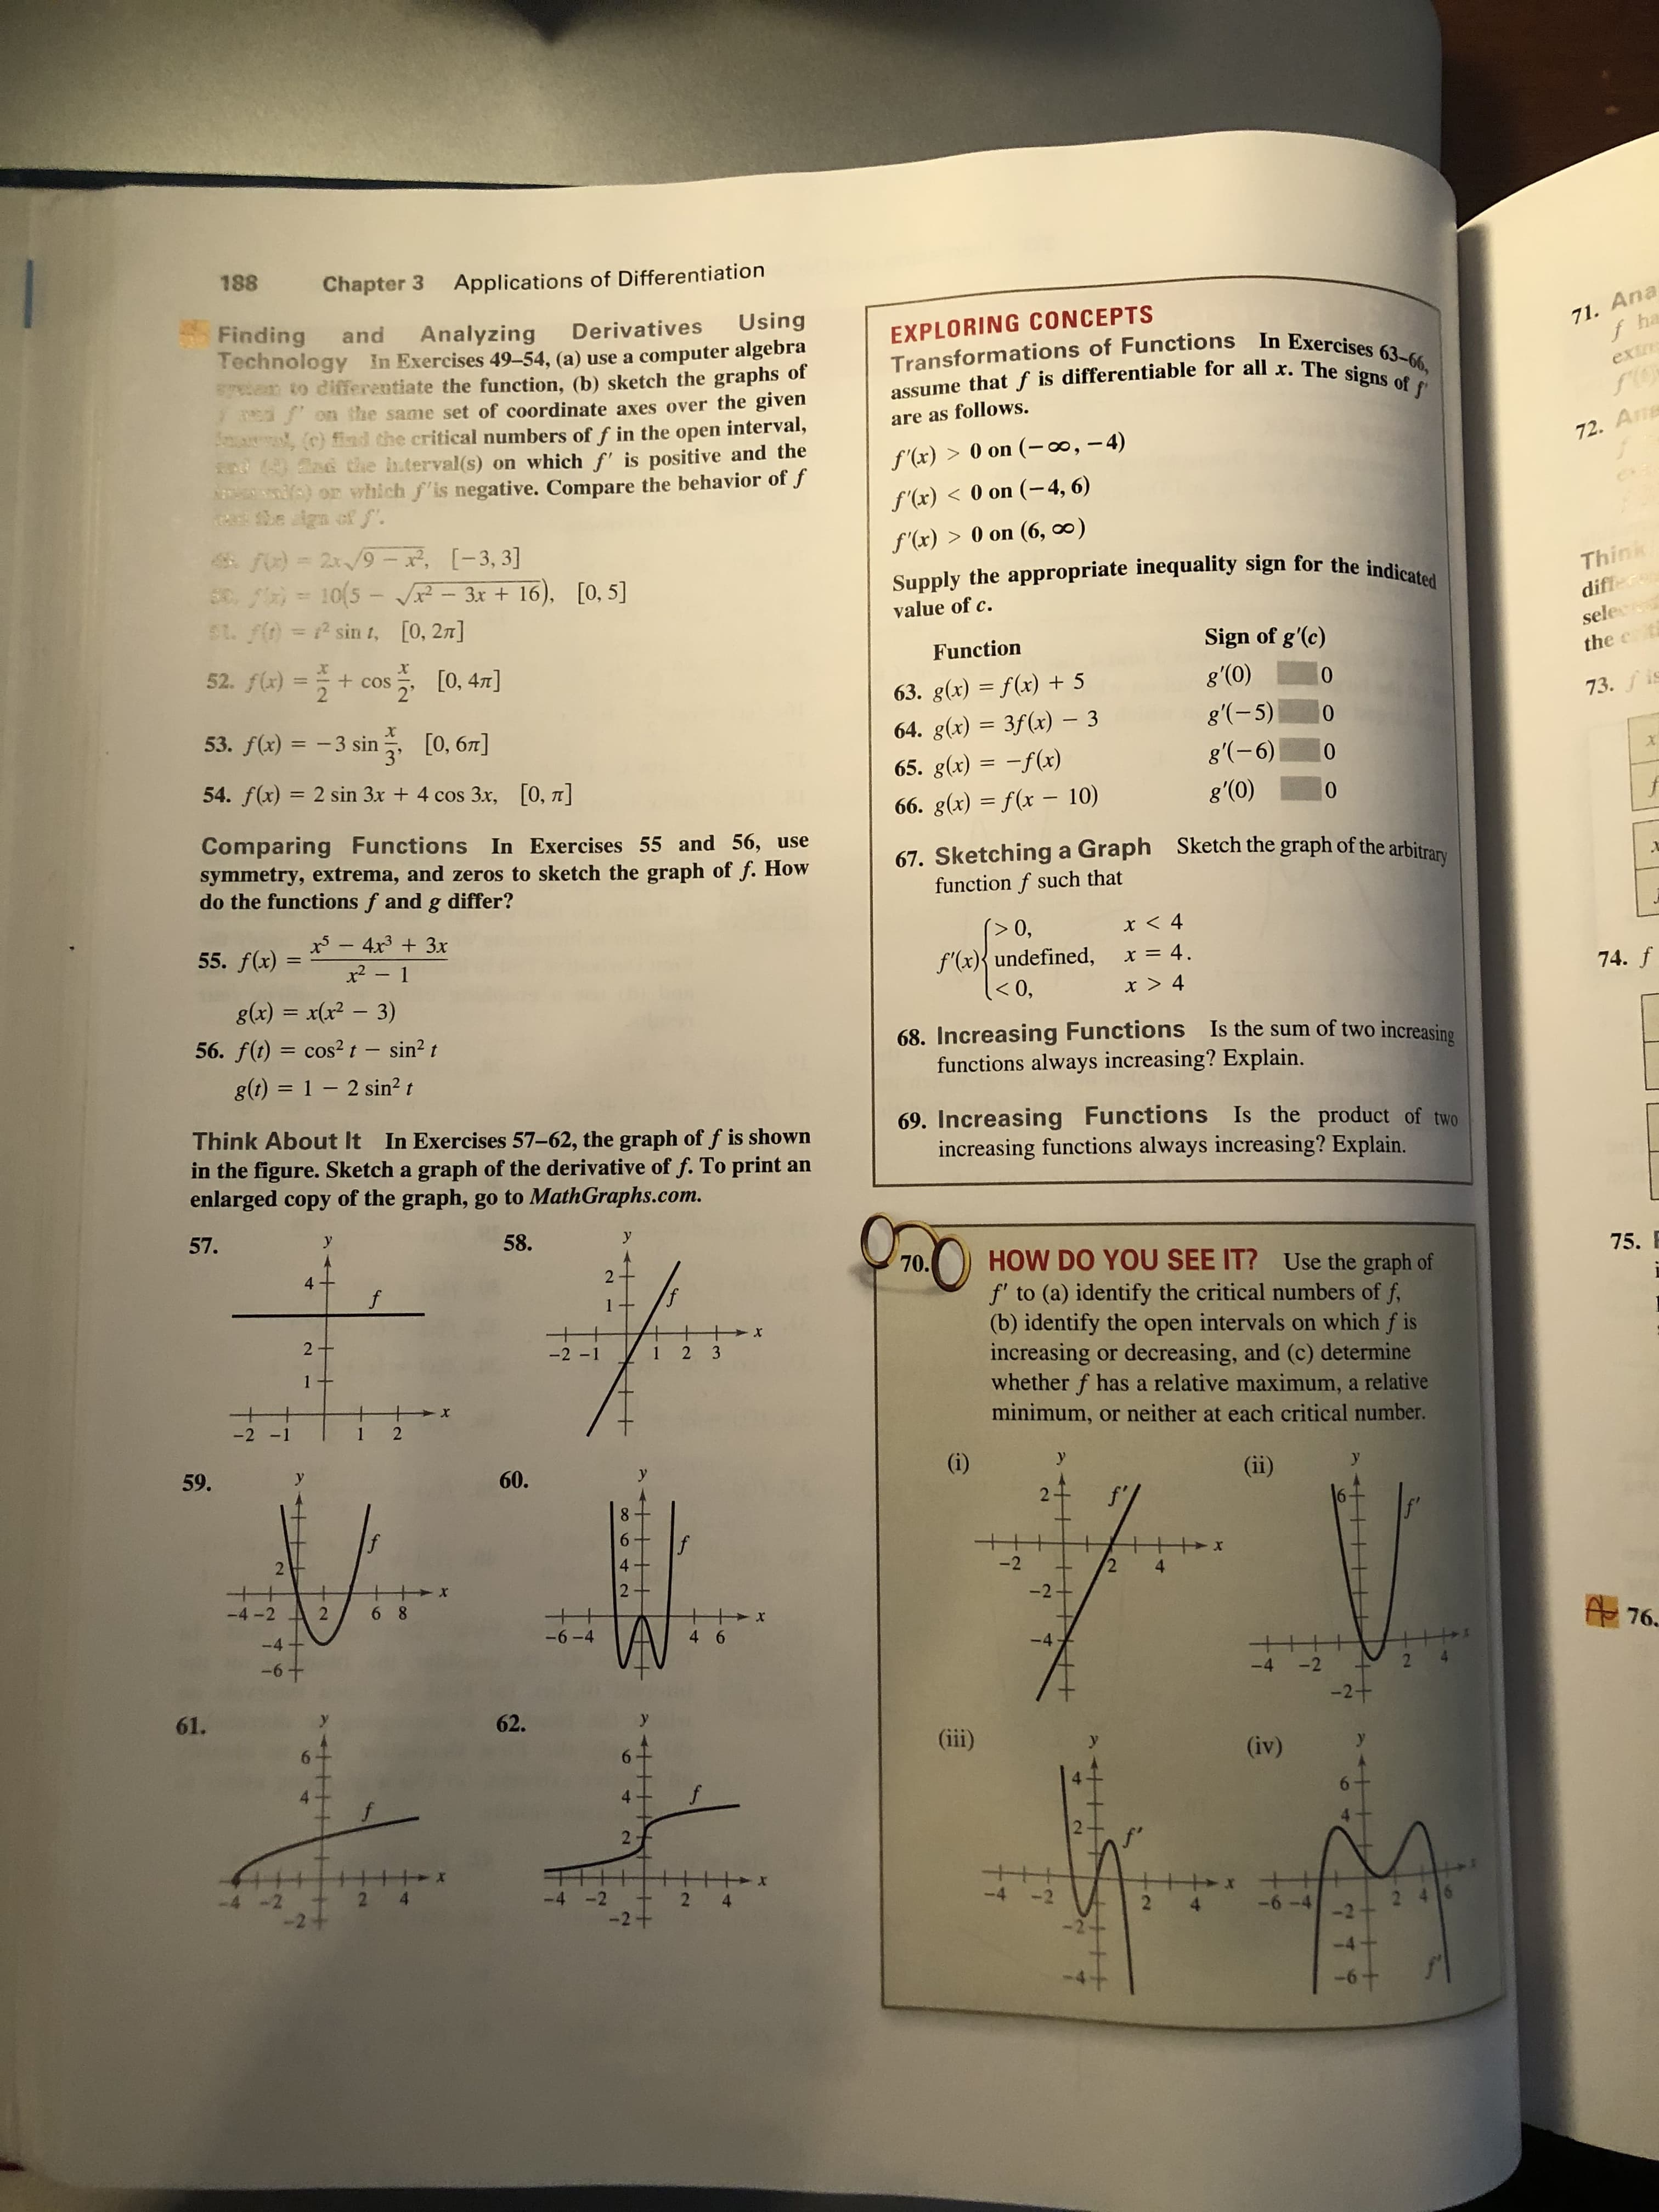 188
Chapter 3
Applications of Differentiation
71. Ana
f ha
Finding
Technology In Exercises 49-54, (a) use a computer algebra
an to diferentiate the function, (b) sketch the graphs of
2 3PEA om the same set of coordinate axes over the given
Sma (c) find the critical numbers of f in the open interval,
18 Gad chhe h.terval(s) on which f' is positive and the
)or which f'is negative. Compare the behavior of f
ca he ign off
Using
and
Analyzing
Derivatives
EXPLORING CONCEPTS
Transformations of Functions In Exercises 63-66,
assume that f is differentiable for all x. The signs of f
exin
are as follows.
72. An
f'(x) > 0 on (-0, -4)
f'(x) < 0 on (-4, 6)
f'(x)> 0 on (6, oo)
48 FO) = 2x/9- x, [-3, 3]
0 /) = 10(5 - 3x+ 16),
Think
differ
Supply the appropriate inequality sign for the indicated
[0, 5]
value of c.
SL f(D =2 sin t, [0, 2]
sele
Sign of g'(c)
Function
52. f)=2
-+cos [0, 47]
the
+COS
g'(0)
10
63. g(x) f(x) +5
73.fis
g'(-5)
53. f(x) 3 sin
0
64. g(x) 3f(x) - 3
[0, 67]
g'(-6)
0
65. g(x)f(x)
54. f(x) 2 sin 3x + 4 cos 3x, [0, 7T]
'(0)
0
66. g(x) = f(x - 10)
Comparing FunctionsIn Exercises 55 and 56, use
symmetry, extrema, and zeros to sketch the graph of f. How
do the functions f and g differ?
Sketch the graph of the arbitrary
67. Sketchinga Graph
function f such that
-4x3 3x
0,
x < 4
55. f(x) =
f'(x){undefined,
x2- 1
x = 4.
74. f
<0,
x > 4
g(x) = x(x2 - 3)
56. f(t) cos2t- sin2 t
Is the sum of two increasing
68. Increasing Functions
functions always increasing? Explain.
1
1 - 2 sin2 t
g(t)
69. Increasing Functions Is the product of two
increasing functions always increasing? Explain.
Think About It In Exercises 57-62, the graph of f is shown
in the figure. Sketch a graph of the derivative of f. To print an
enlarged copy of the graph, go to MathGraphs.com
57.
y
58.
y
. HOW DO YOU SEE IT? Use the graph of
f' to (a) identify the critical numbers of f
(b) identify the open intervals on which f is
increasing or decreasing, and (c) determine
whether f has a relative maximum, a relative
minimum, or neither at each critical number.
75.
4
2
f
f
1
++
2 -
-2 -1
1
2 3
1
++
-2 -1
+
1 2
(i)
59.
y
60.
(ii)
f'
2.
f
6
2
4
-2
2
4
+
-4-2
2
-2-
6 8
A 76.
-6-4
-4+
4 6
-4
-6+
2
-4
-2
-2+
61.
62.
y
(ii)
6-
(iv)
4
2
2 4
-4 -2
2 4
-2
2 46
2 4
-2 +
-6-4
-2
-6+
4t
2
2
